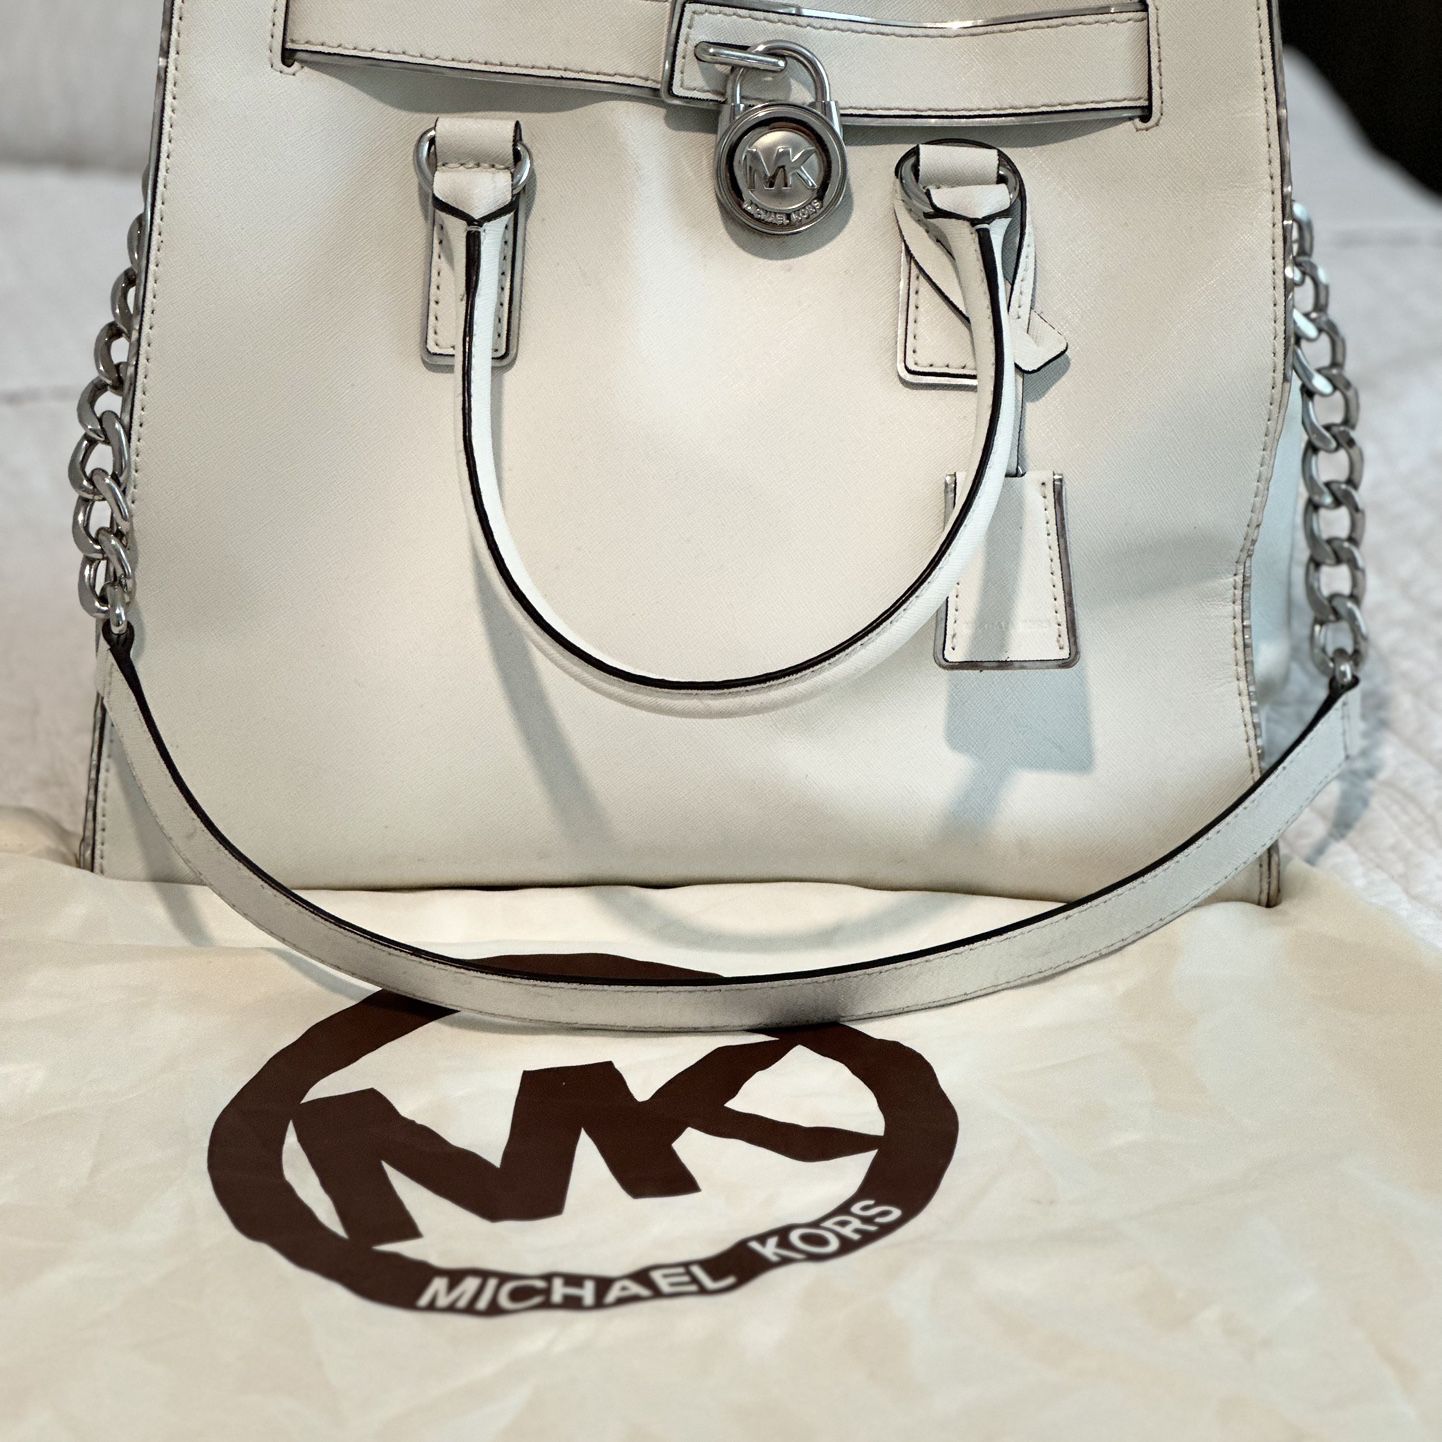 Michael Kors Hamilton Large Tote for Sale in Lehigh Acres, FL - OfferUp